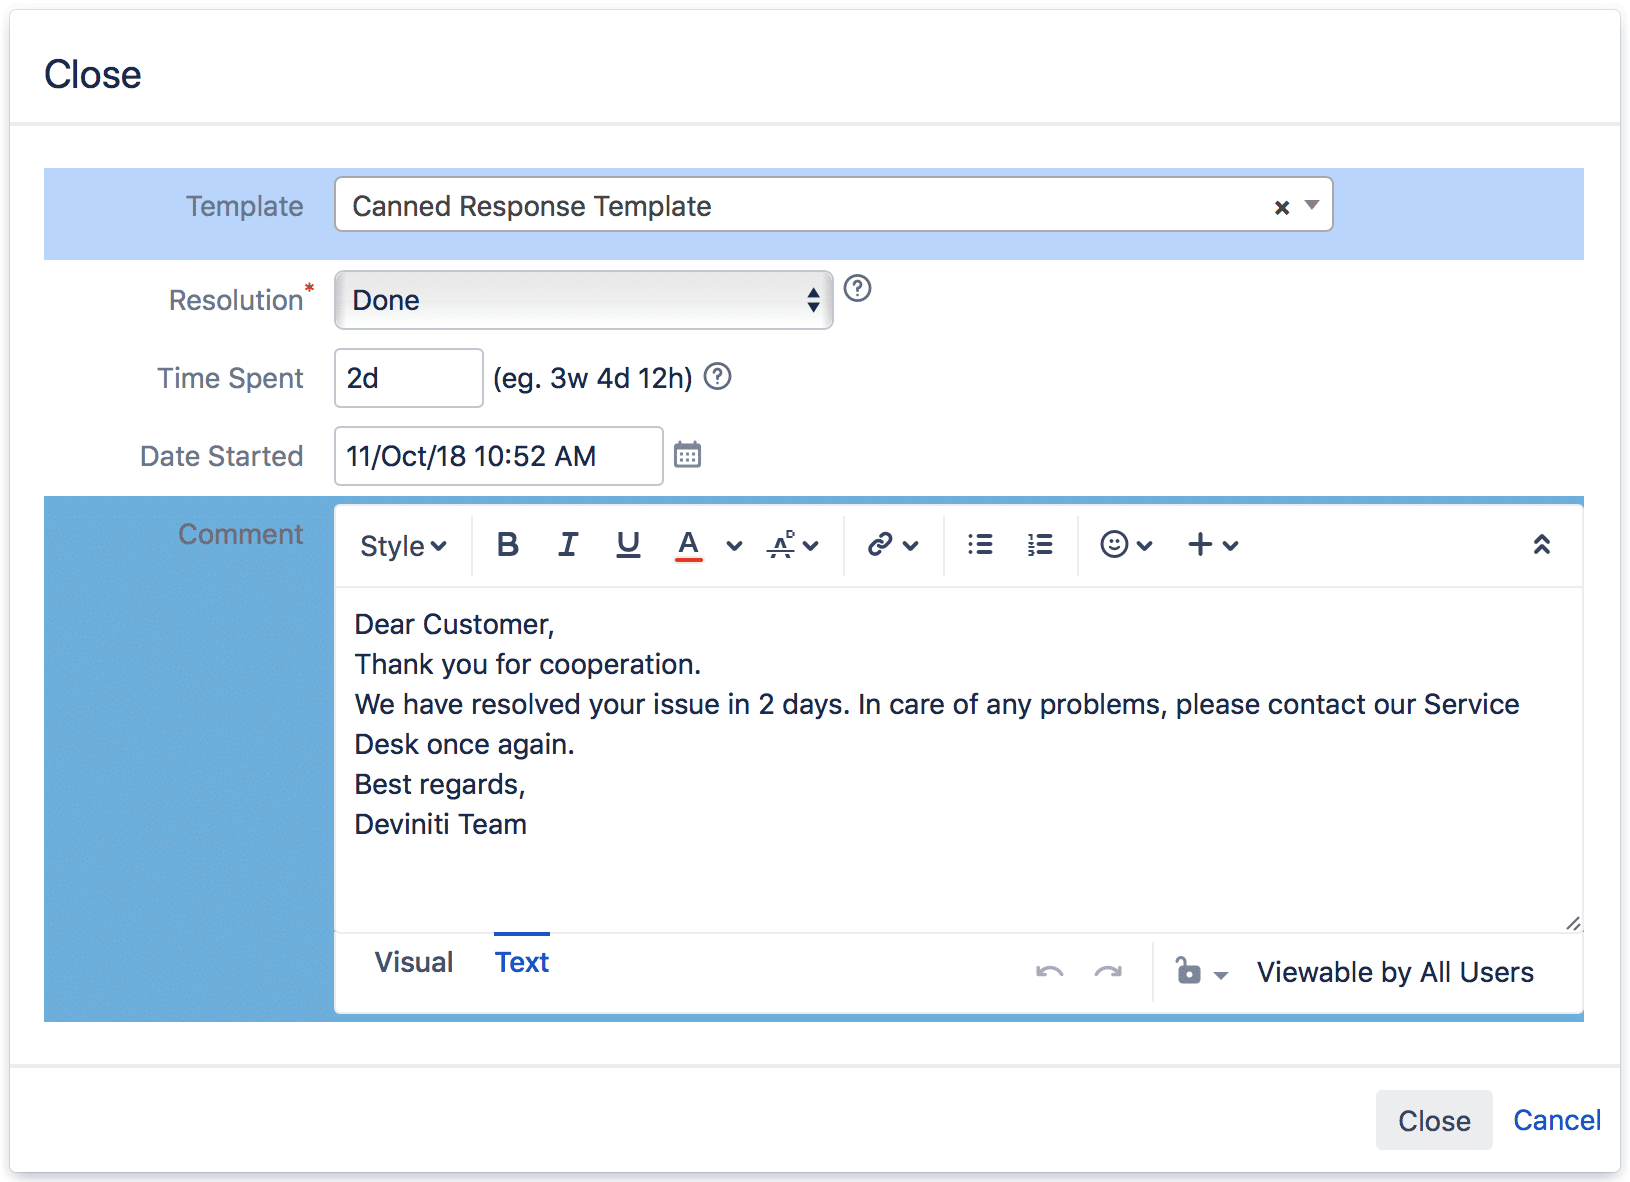 Response templates for requests